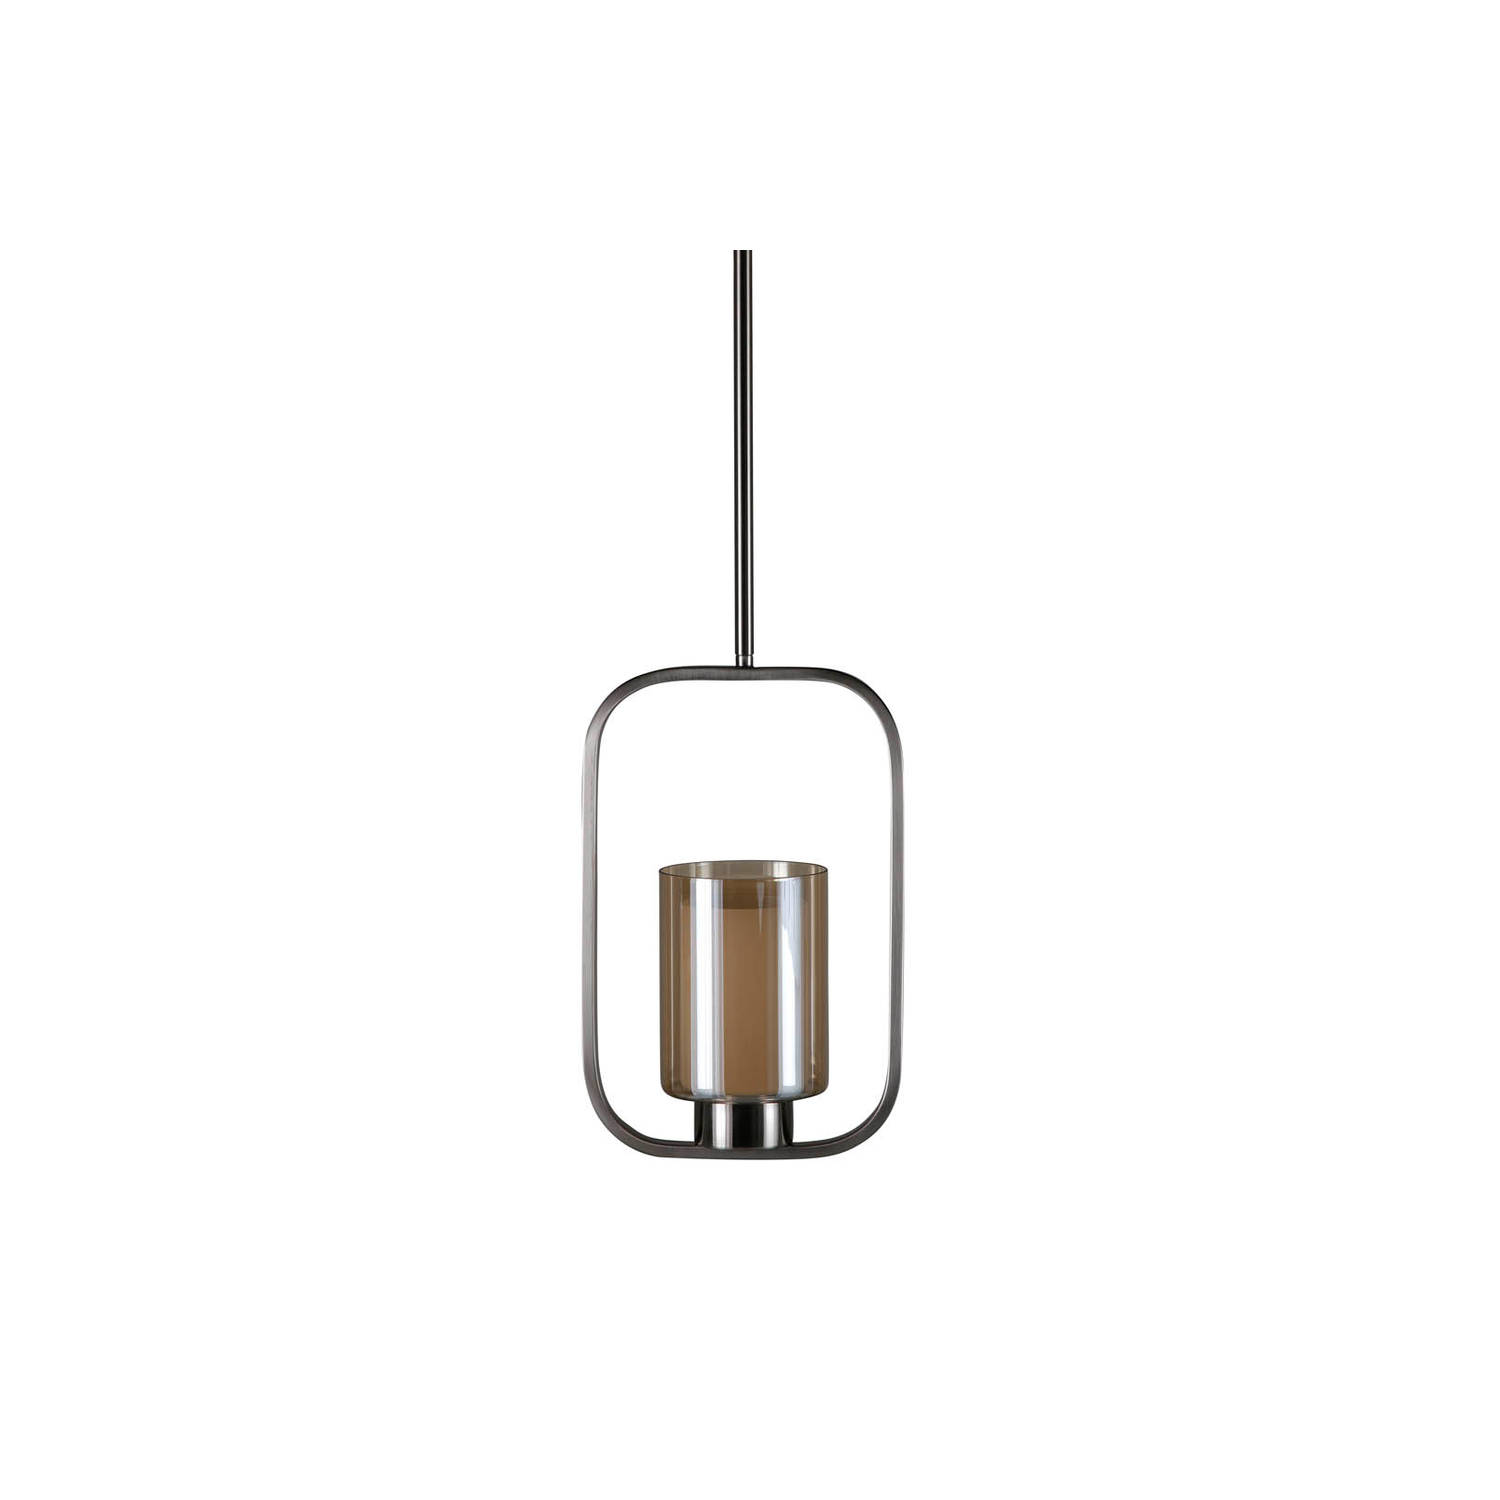 Hioshop Aludra verlichting hanglamp 22x12x34cm glas, staal